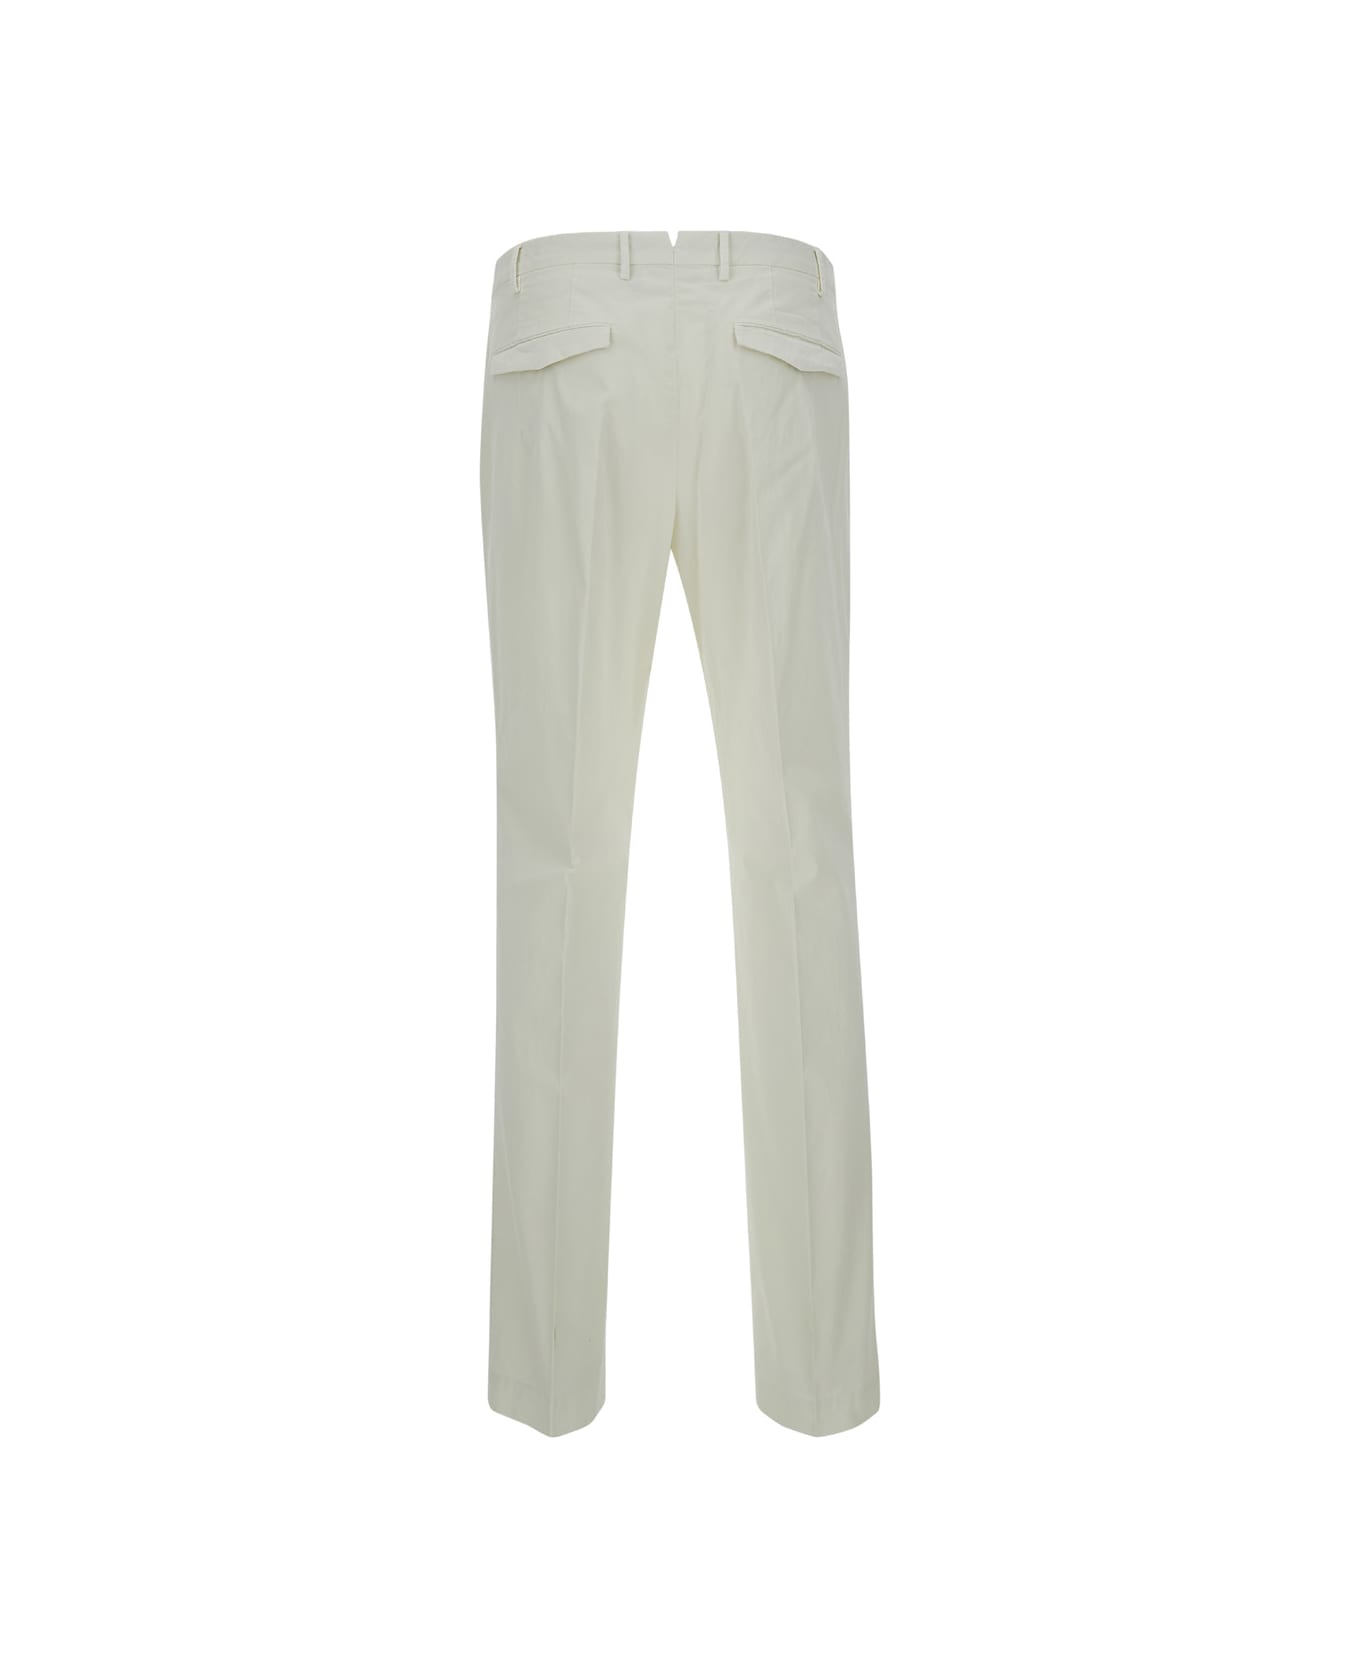 PT01 Sartorial Slim Fit White Trousers In Cotton Blend Man - White